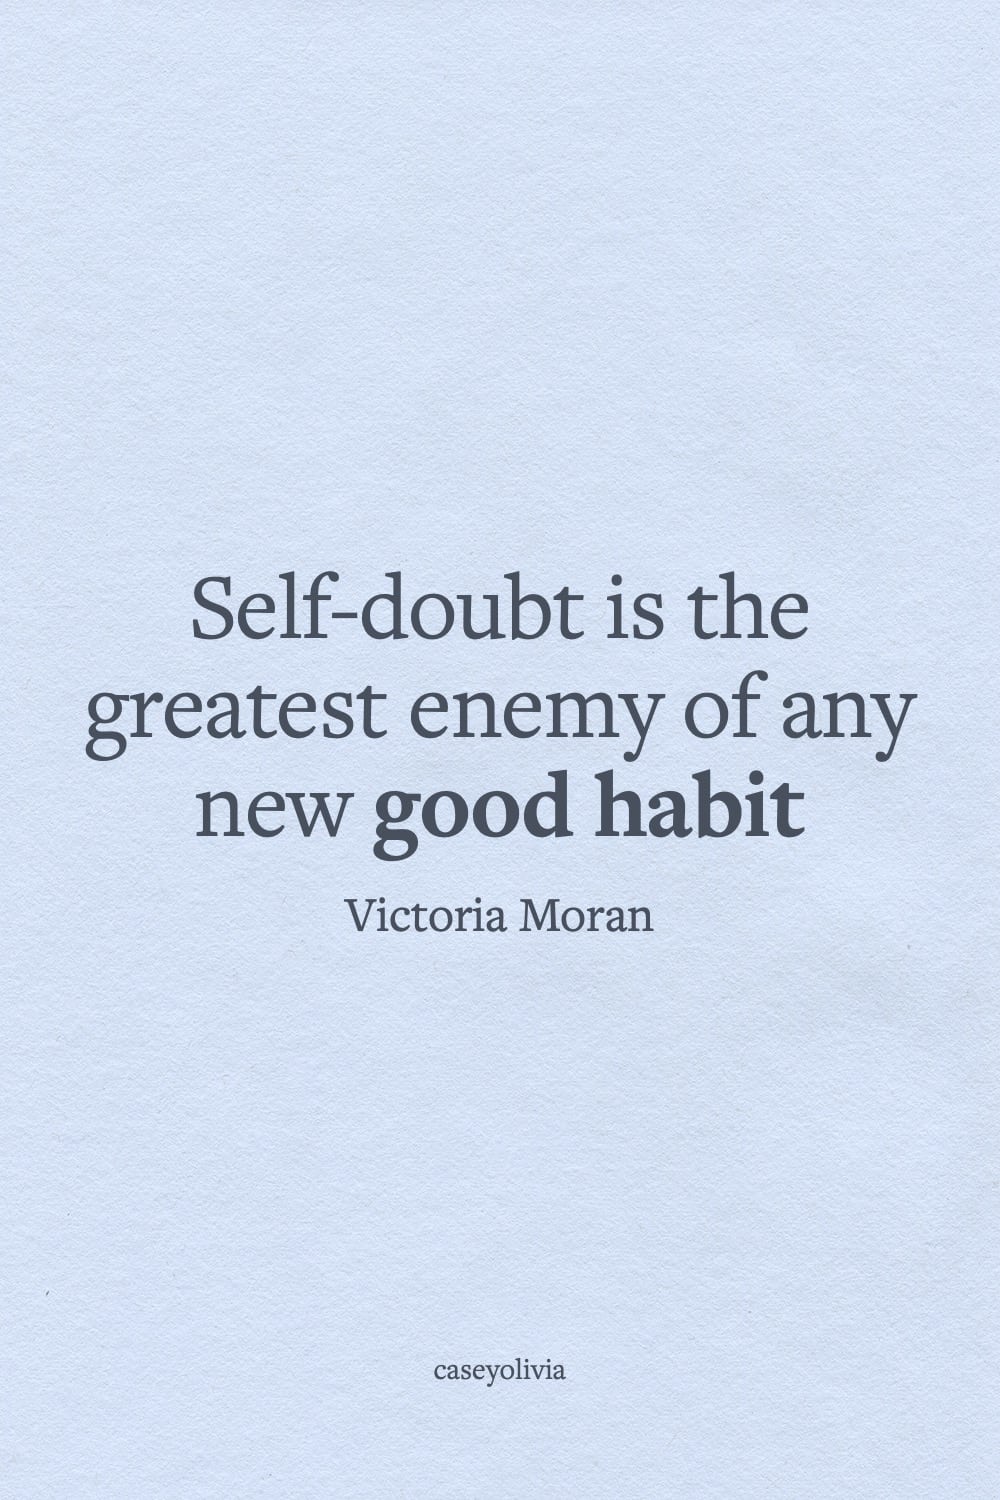 self doubt is the greatest enemy victoria moran quote image